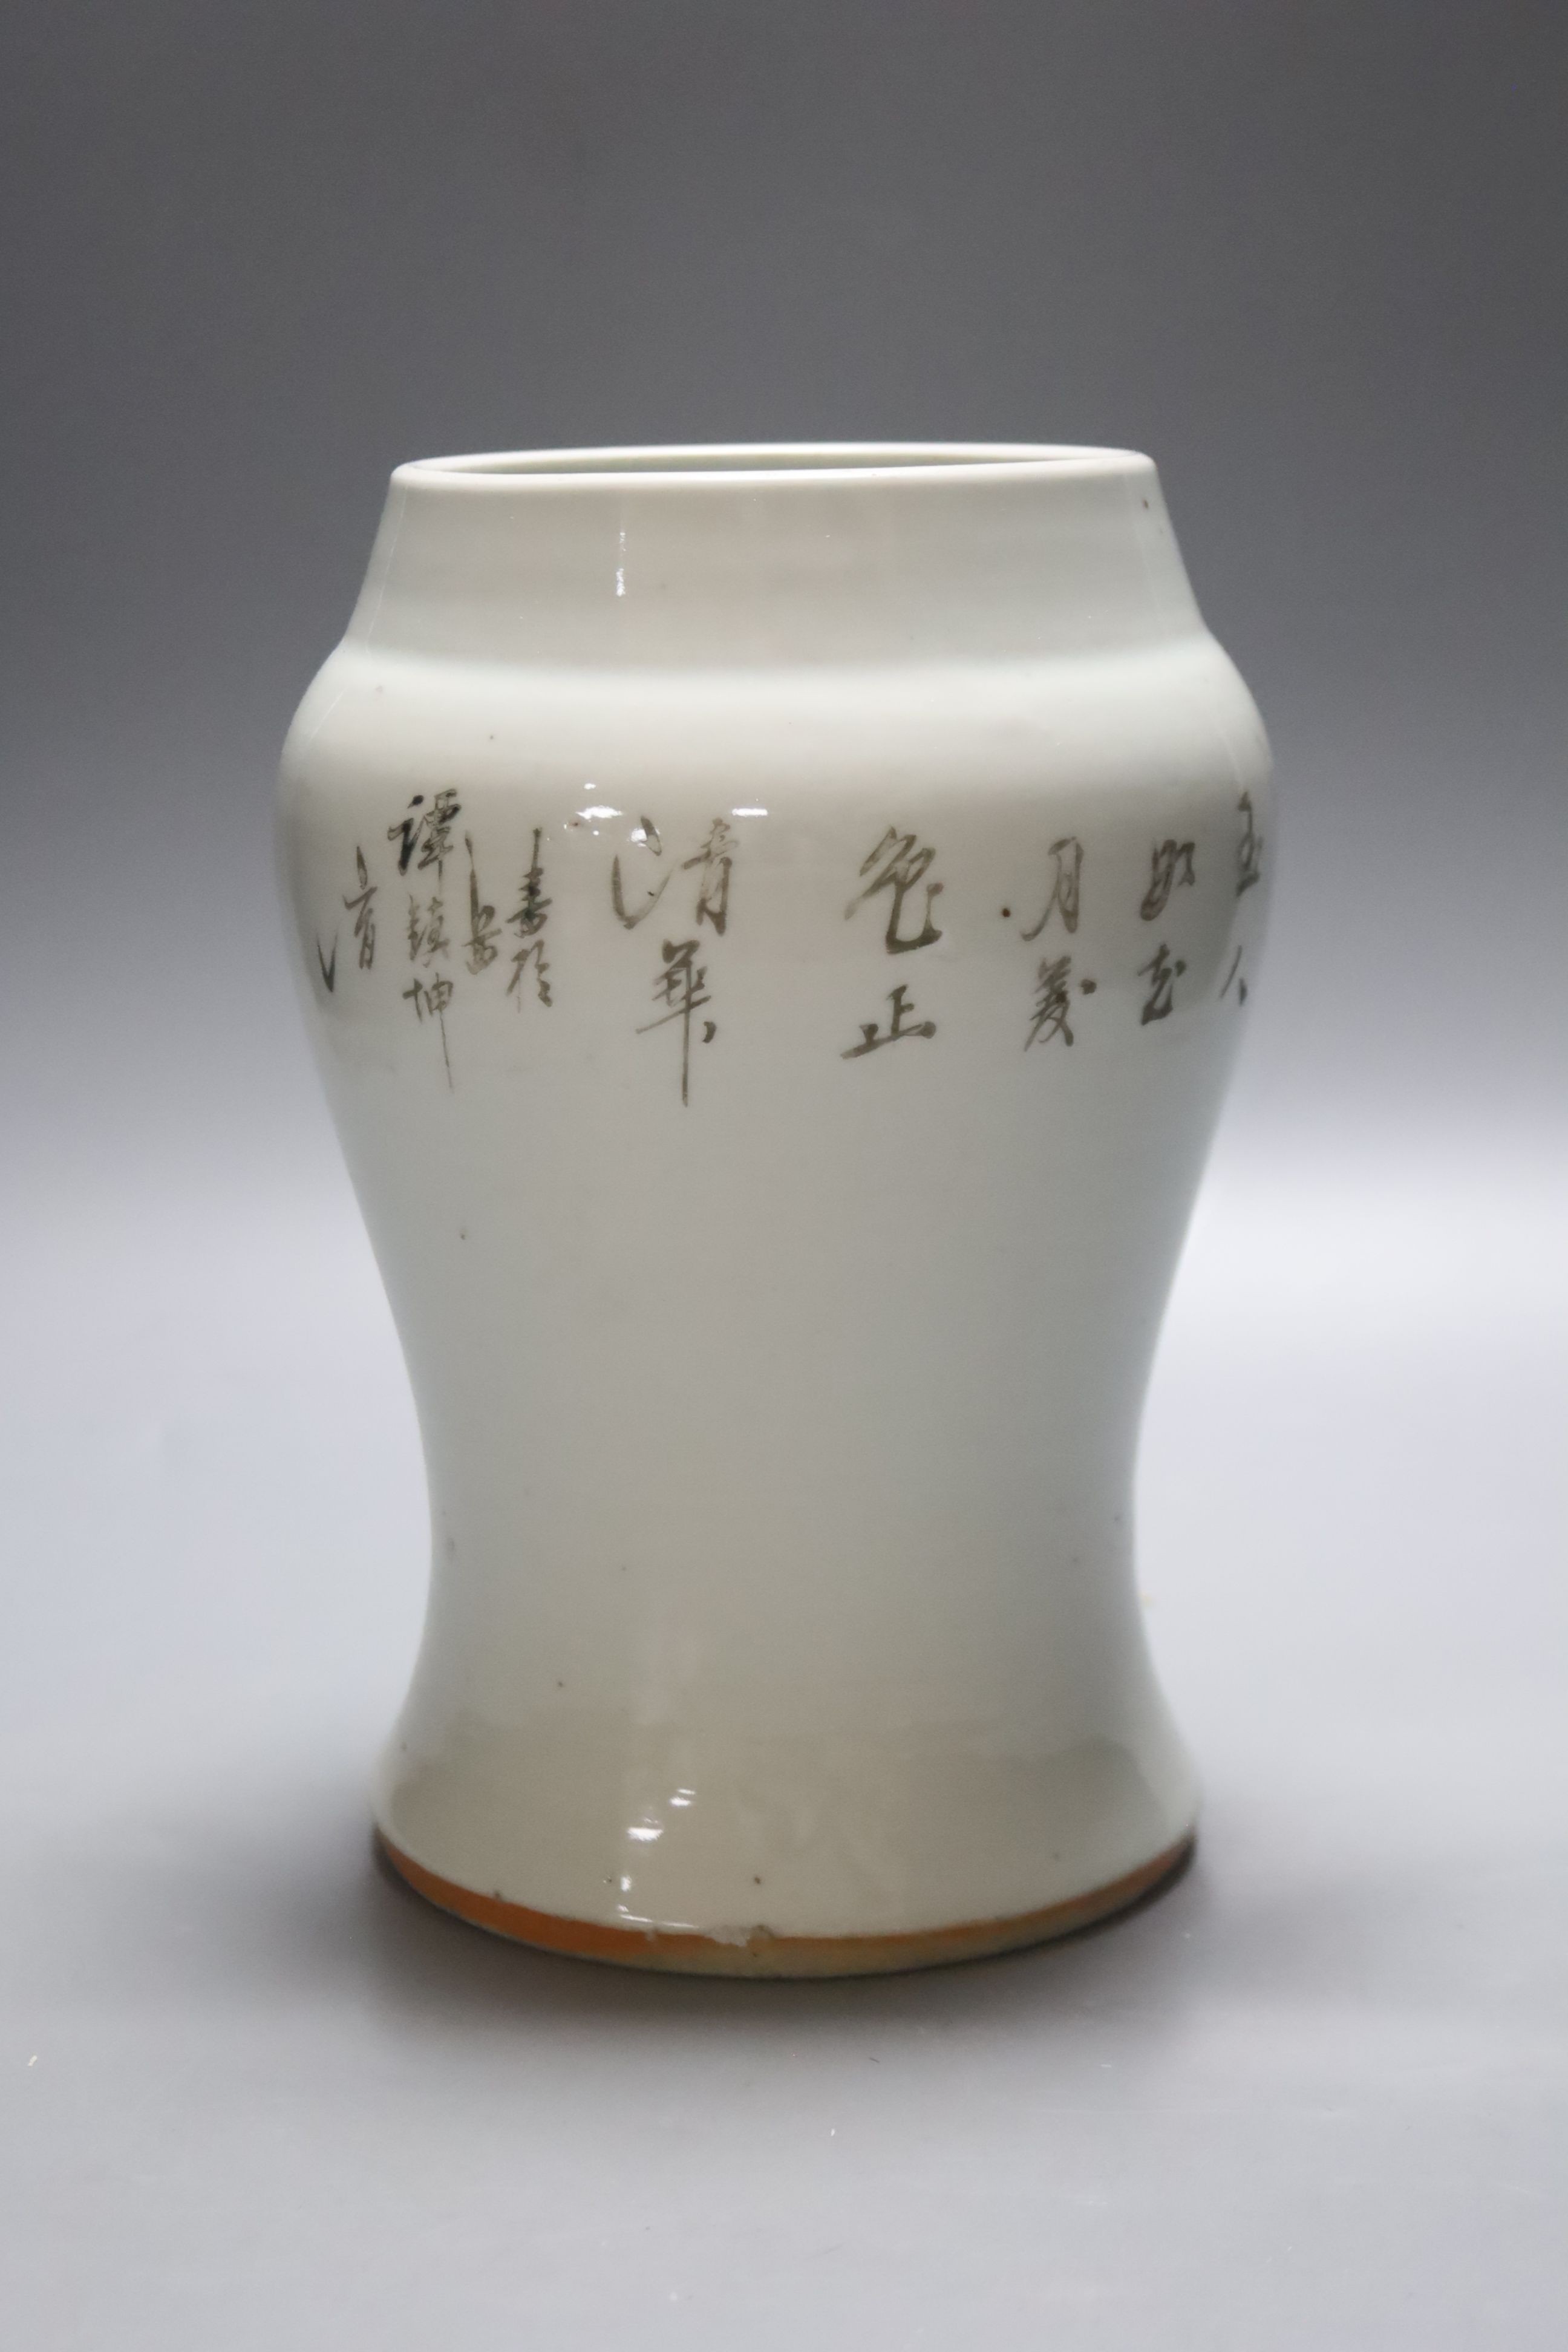 A Chinese porcelain baluster jar, early 20th century, painted with figures and script - Image 2 of 3